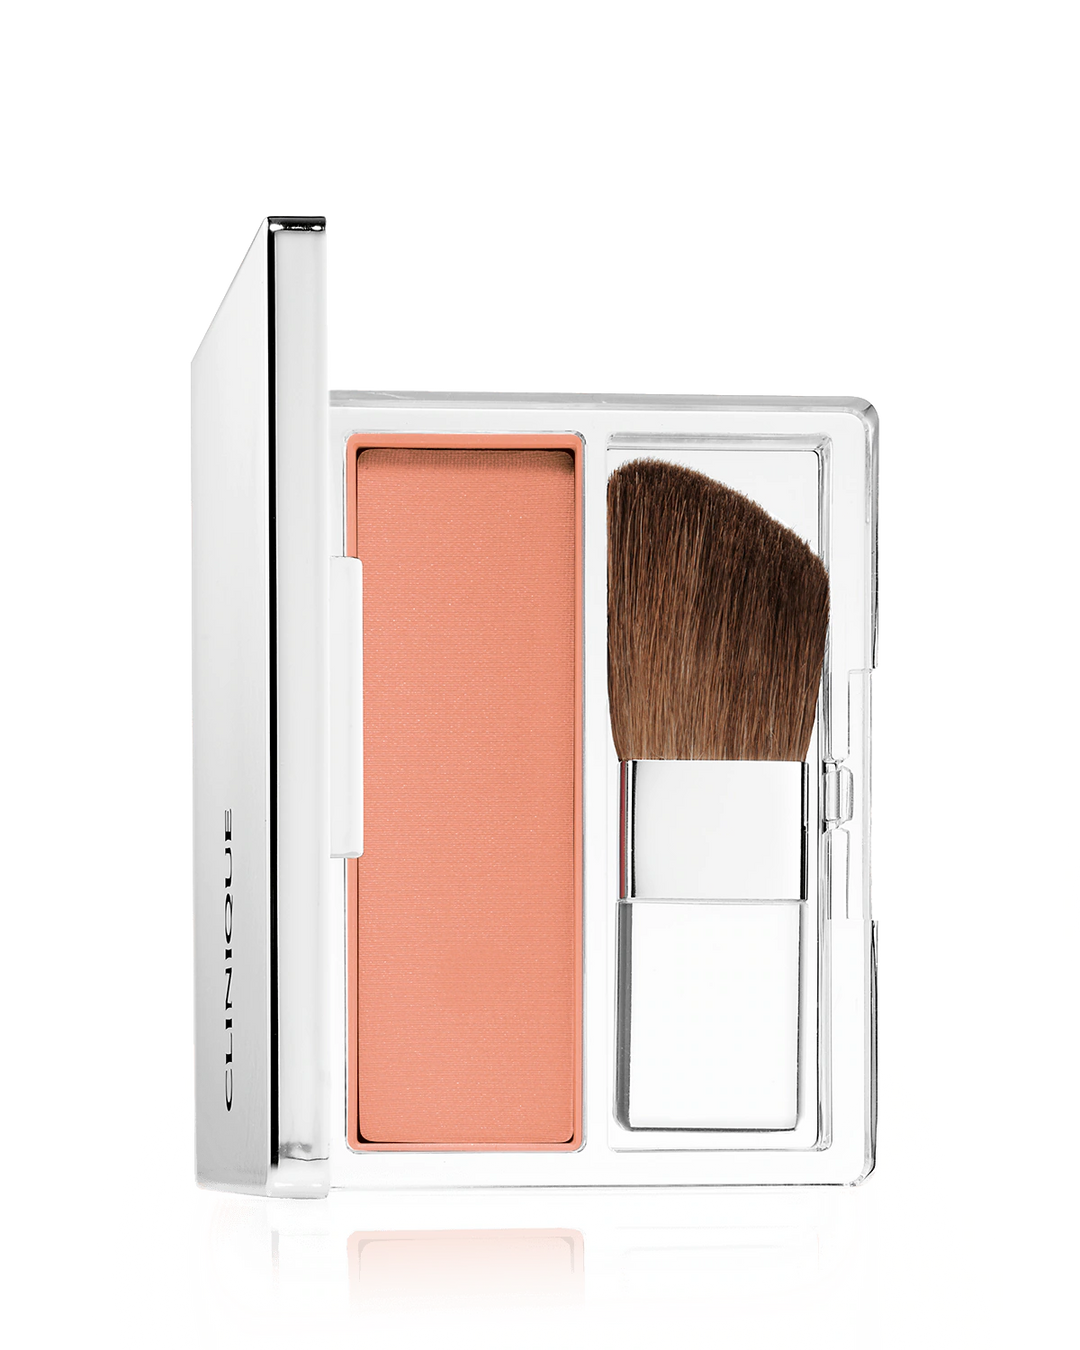 Shop The Latest Collection Of Clinique Blushing Blush Powder Blush In Lebanon